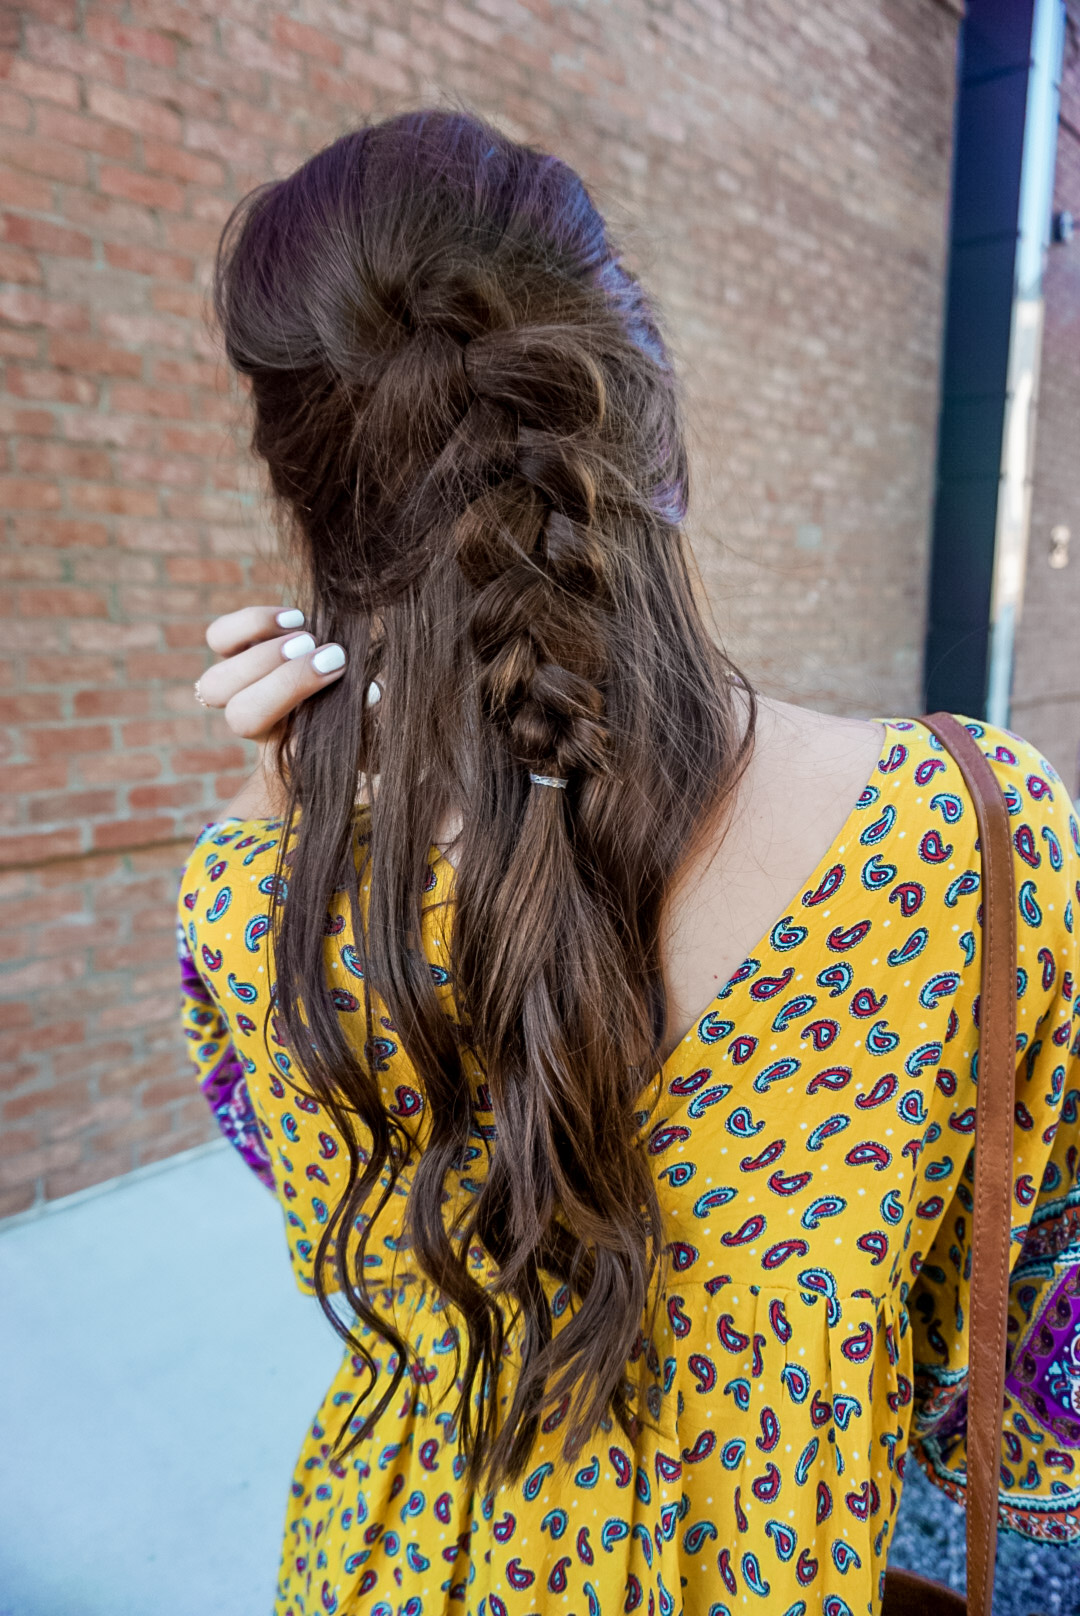 Summer Hairstyles And Hair Care